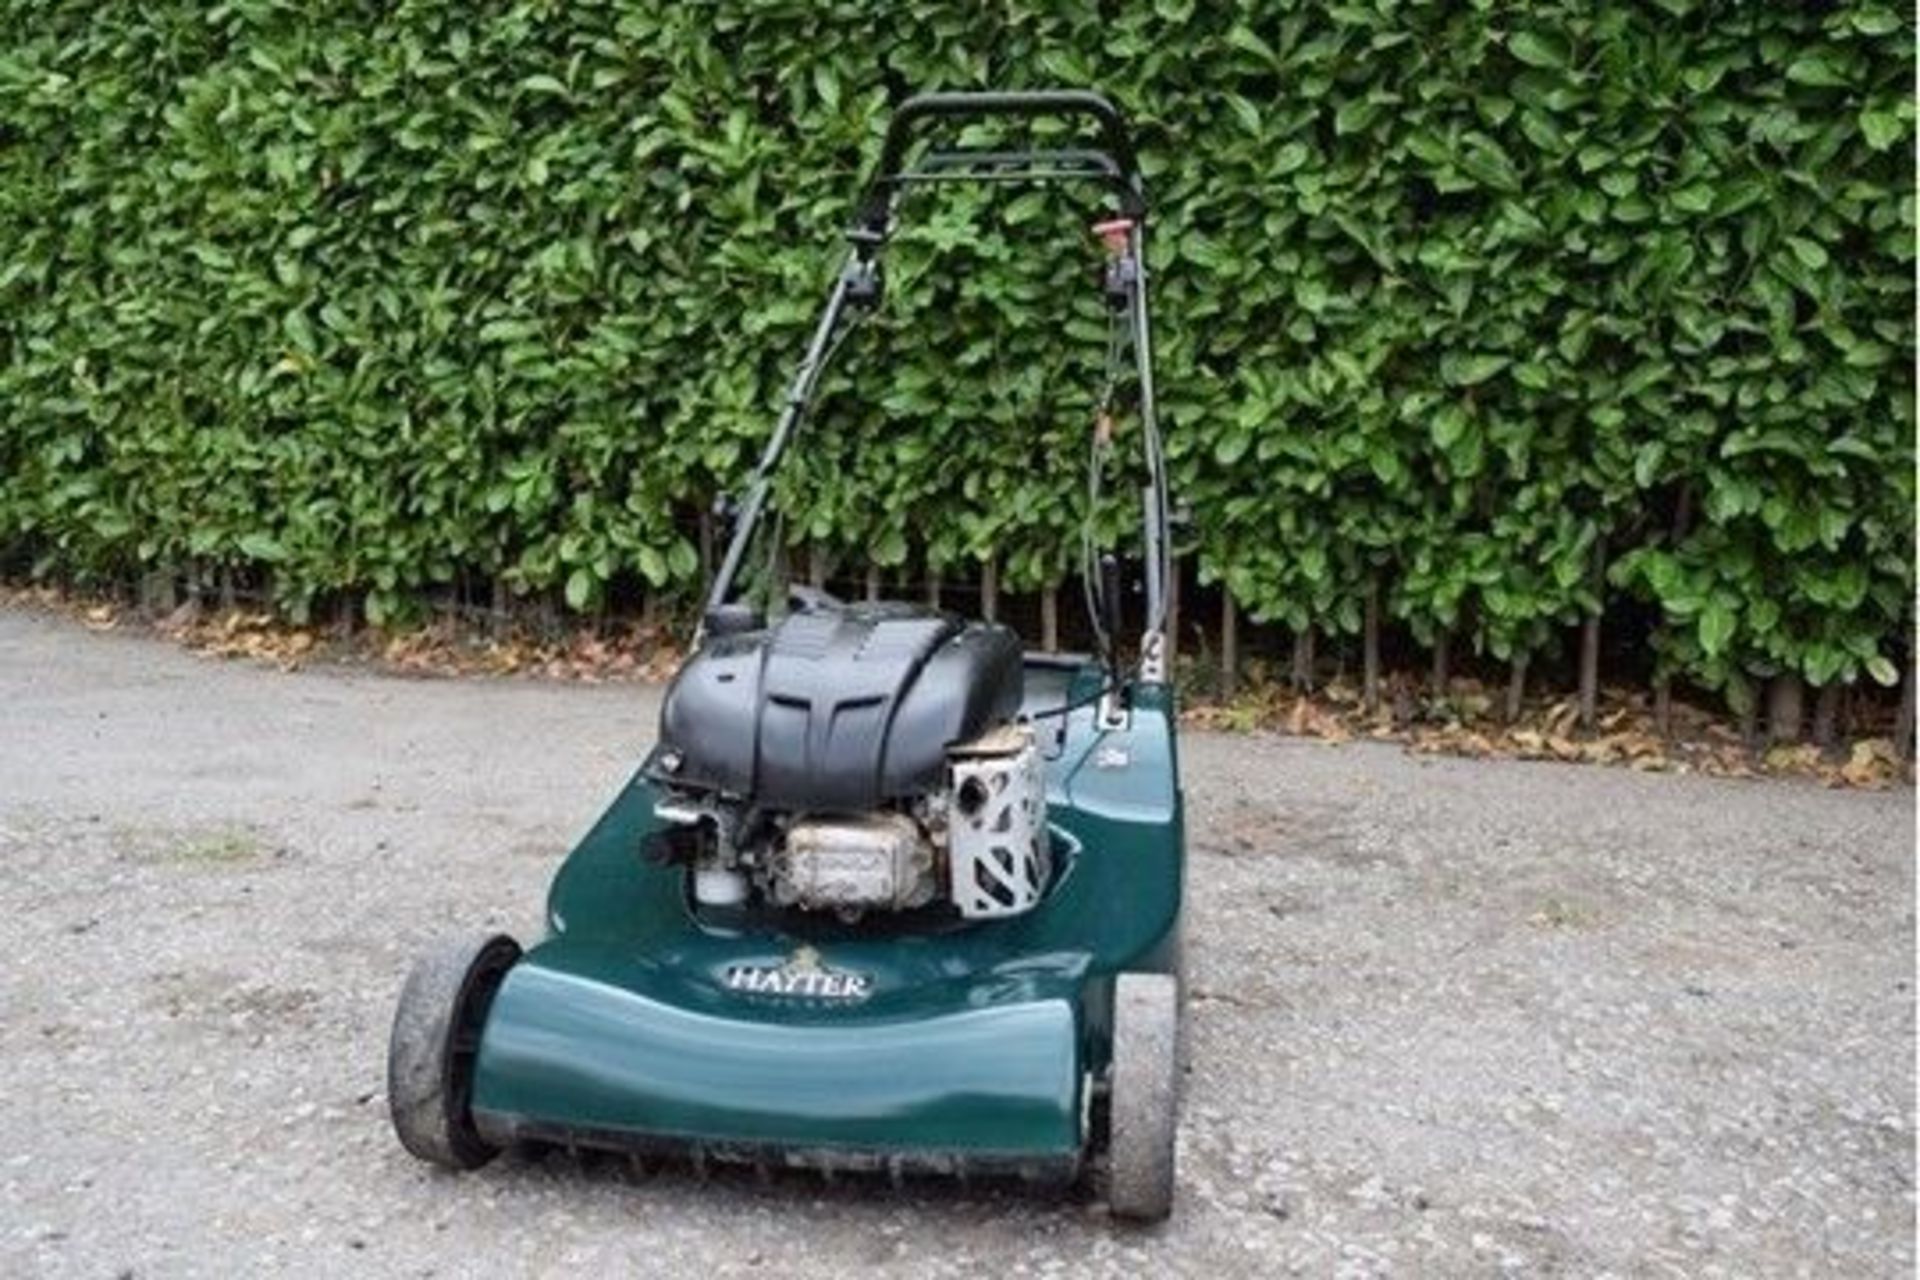 2008 Hayter Harrier 56 Auto Drive Variable Speed 22" Lawn Mower - Image 3 of 6